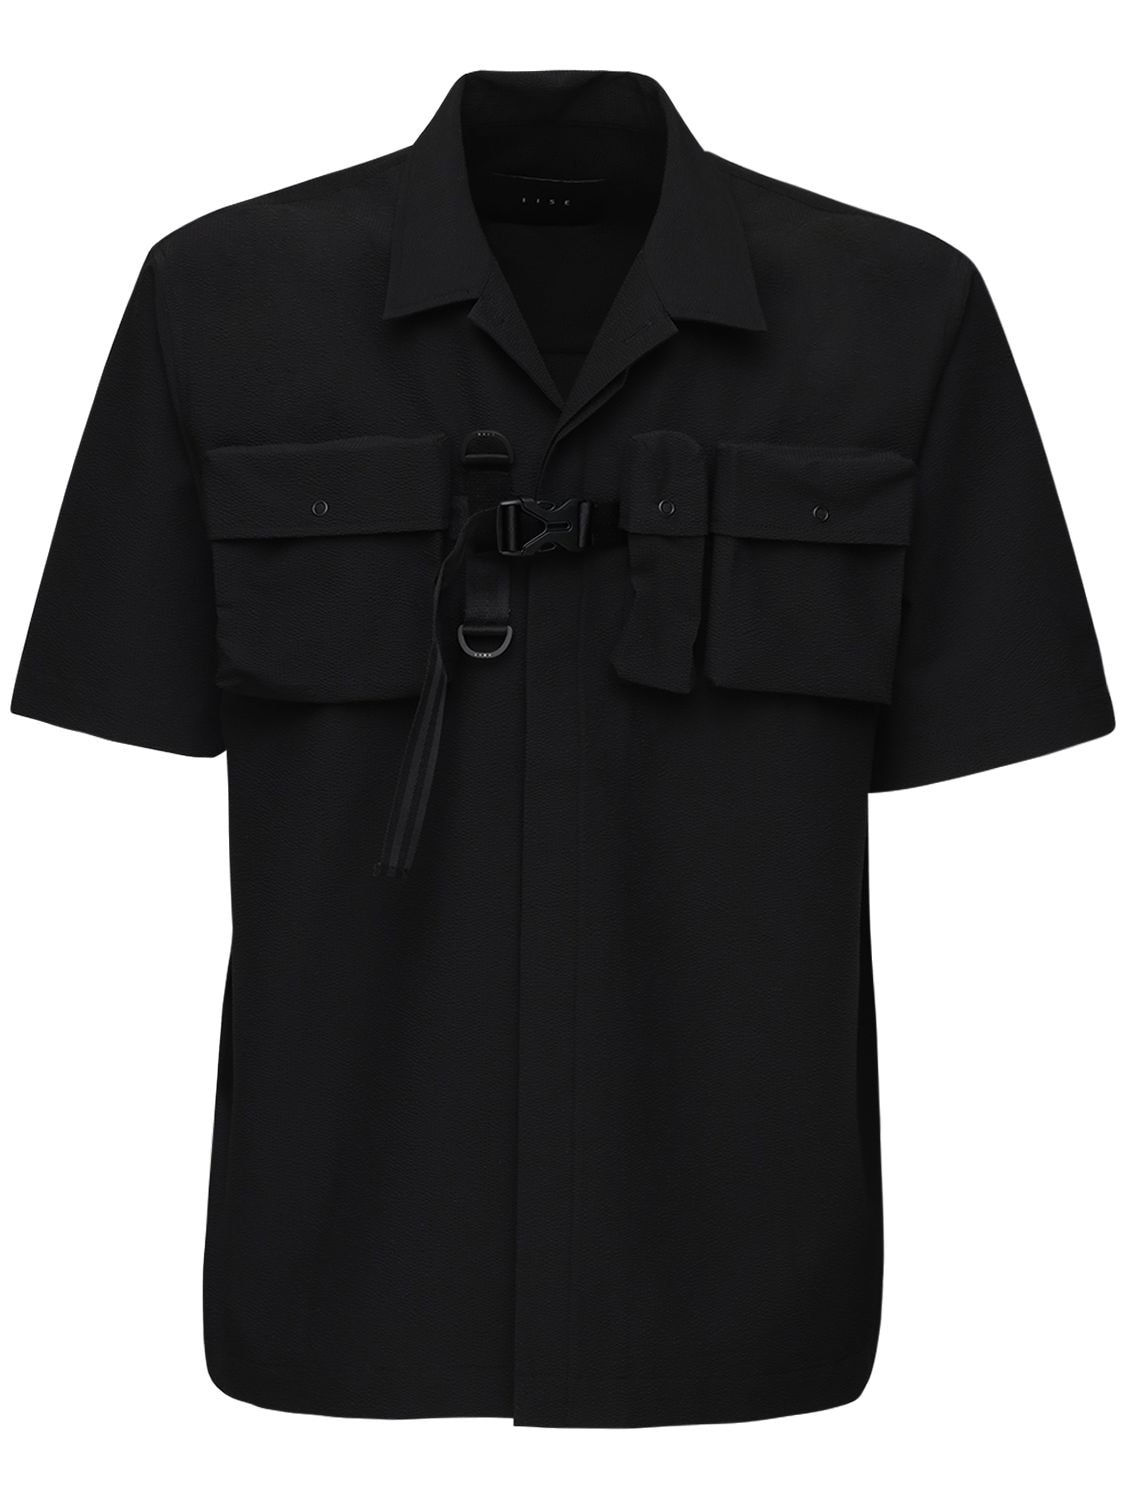 Iise Utility Shirt W/ Pockets & Front Buckle In Black